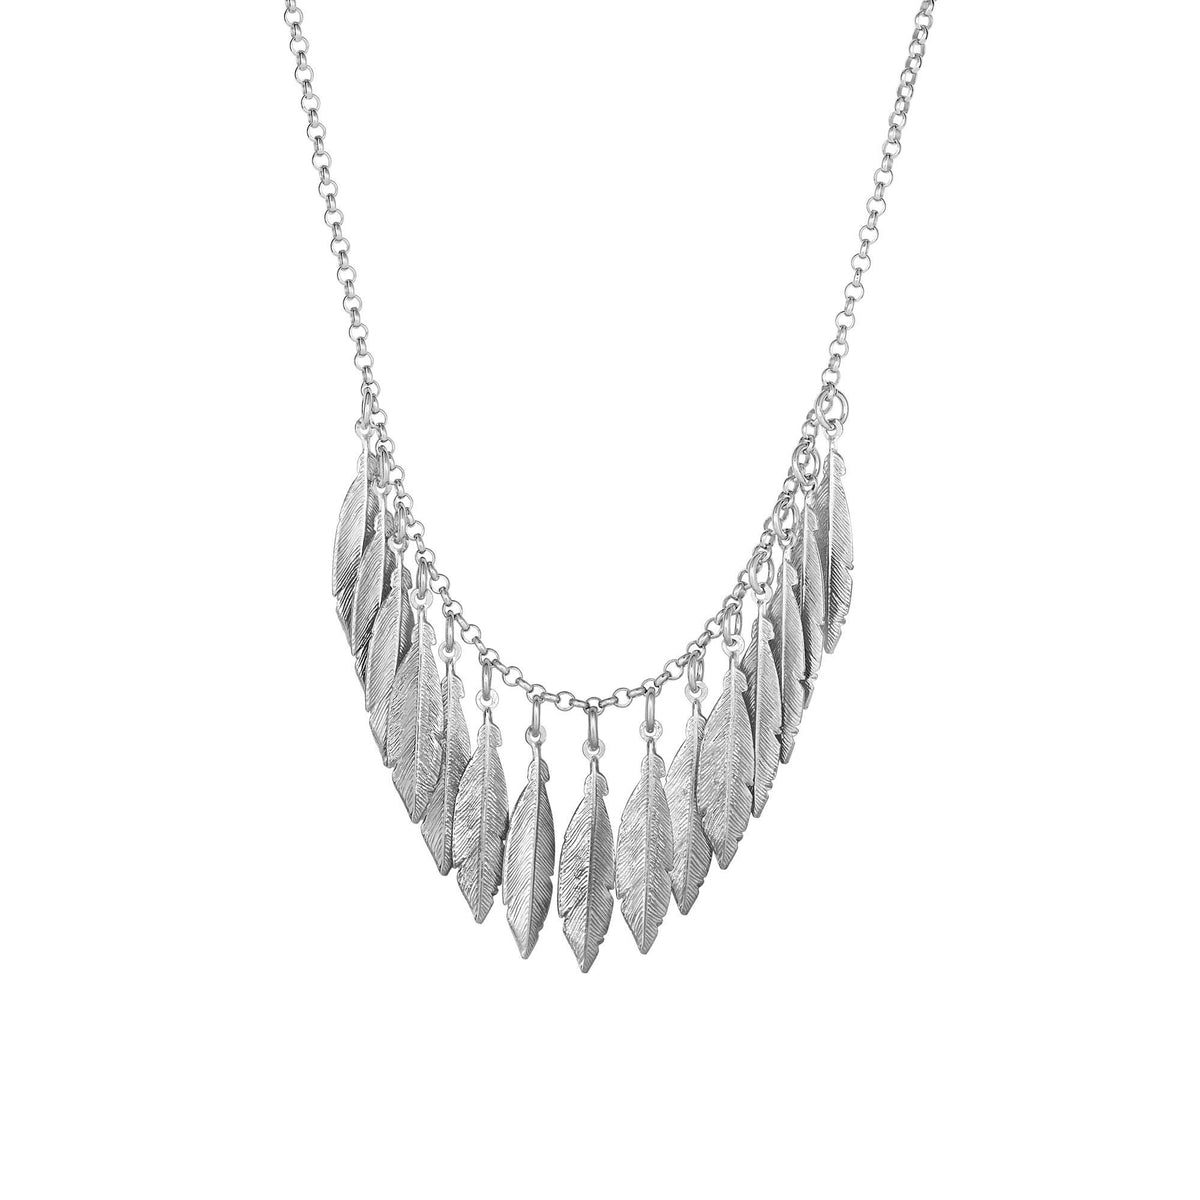 Sterling Silver Leaf Charms Necklace, 18" fine designer jewelry for men and women